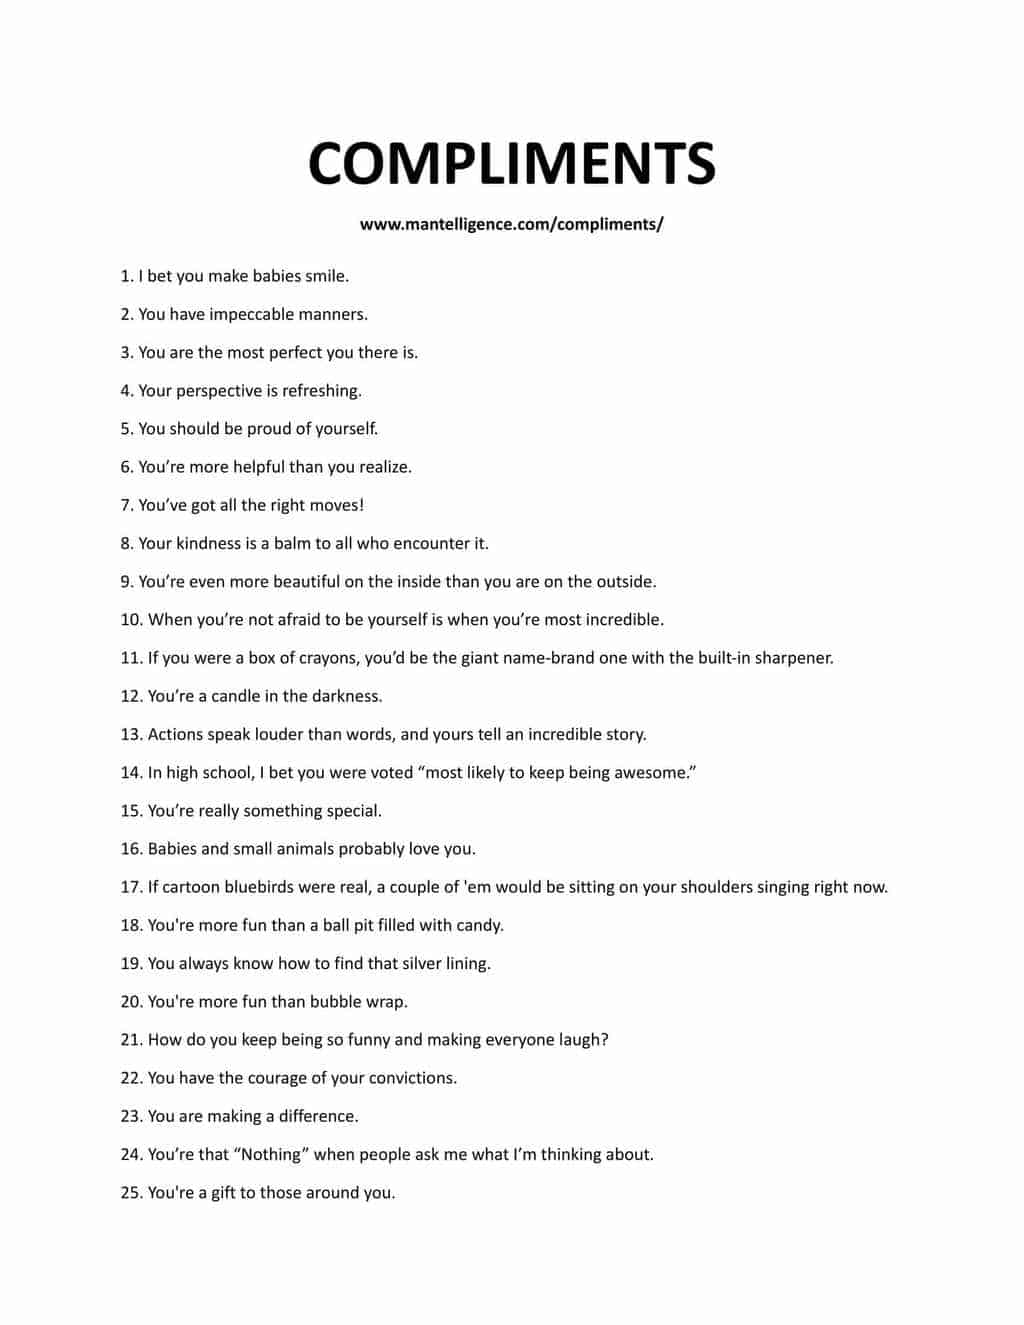 64 Amazing Compliments To Give - How to Make People Feel Great Everytime.